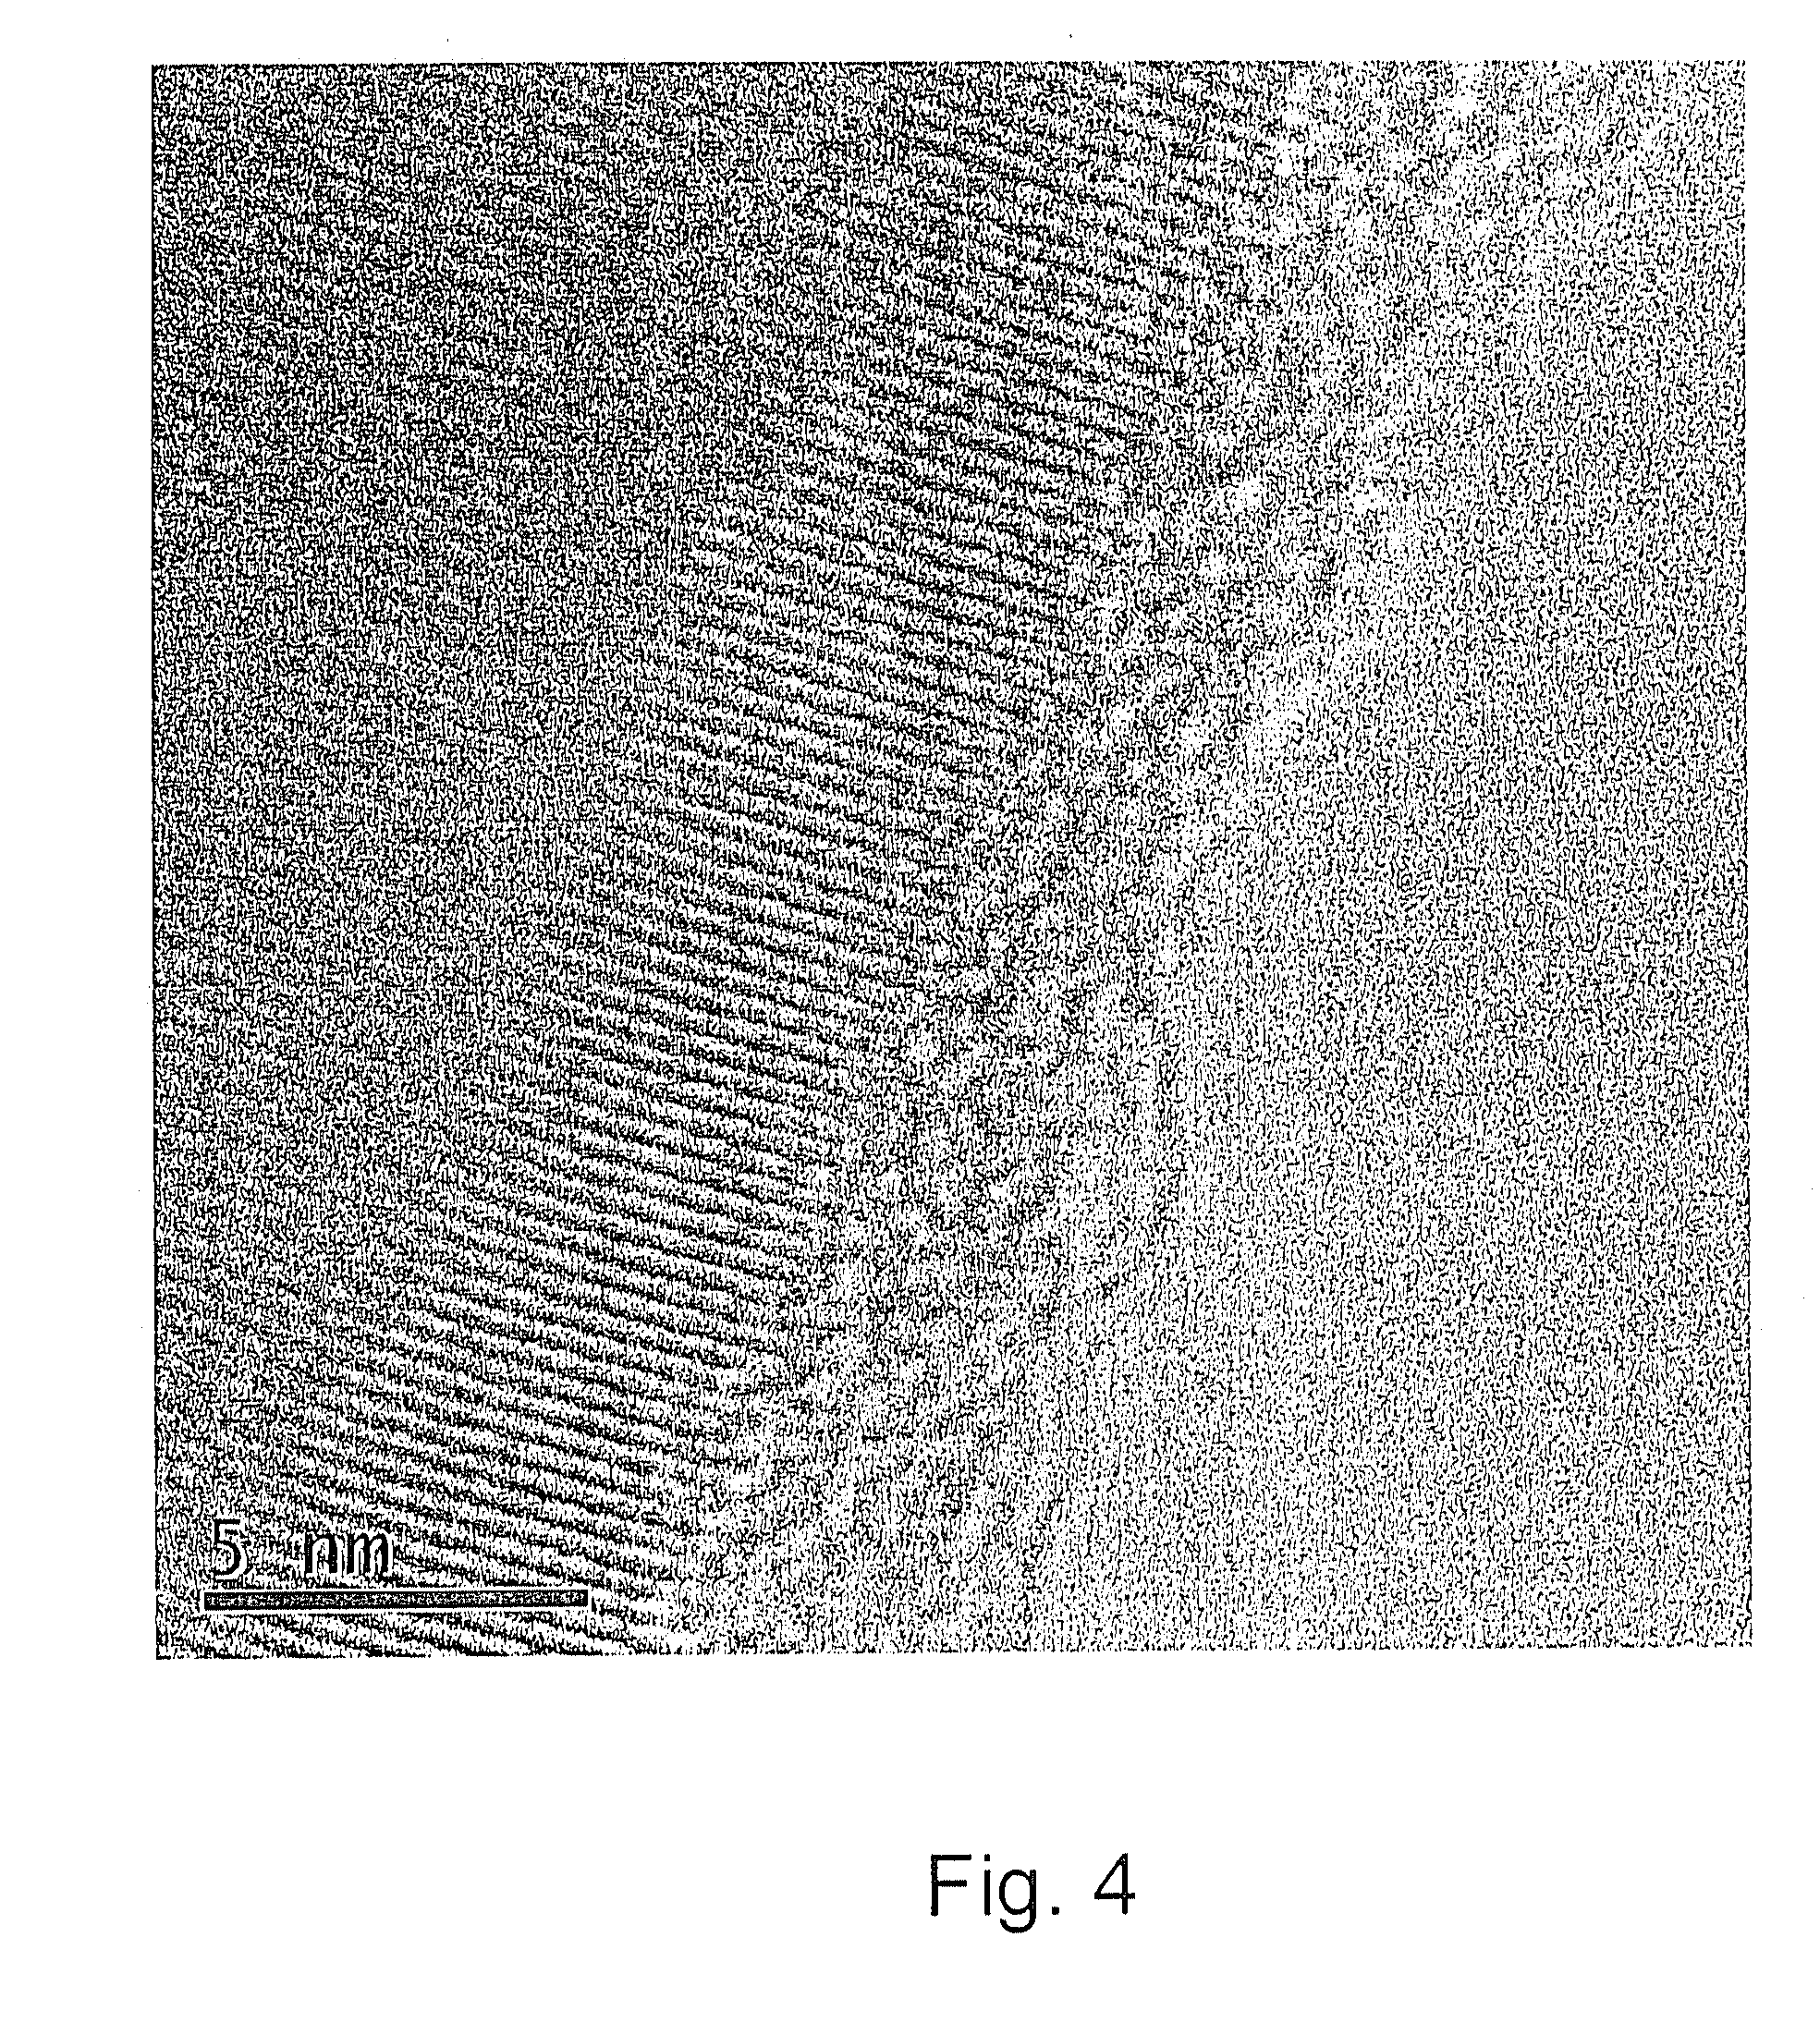 Method of Producing Stable Oxygen Terminated Semiconducting Nanoparticles